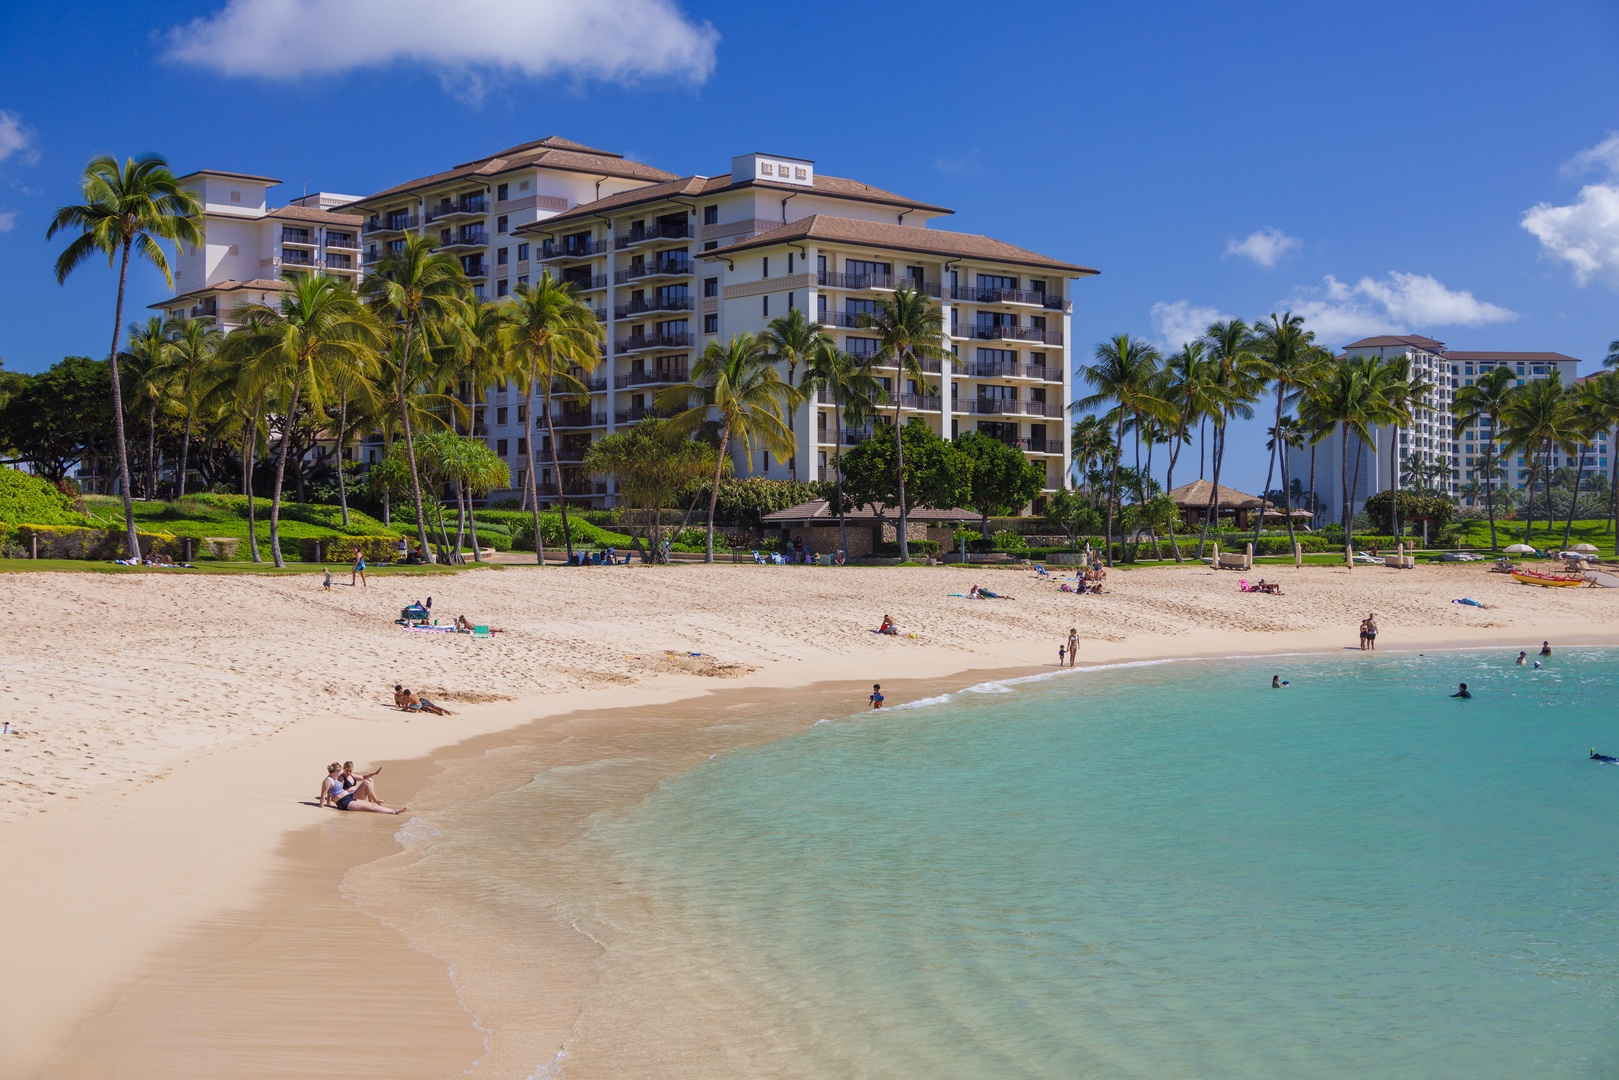 Kapolei Vacation Rentals, Ko Olina Kai 1065E - The private lagoon at Ko Olina is the perfect place for a relaxing afternoon in the sun.